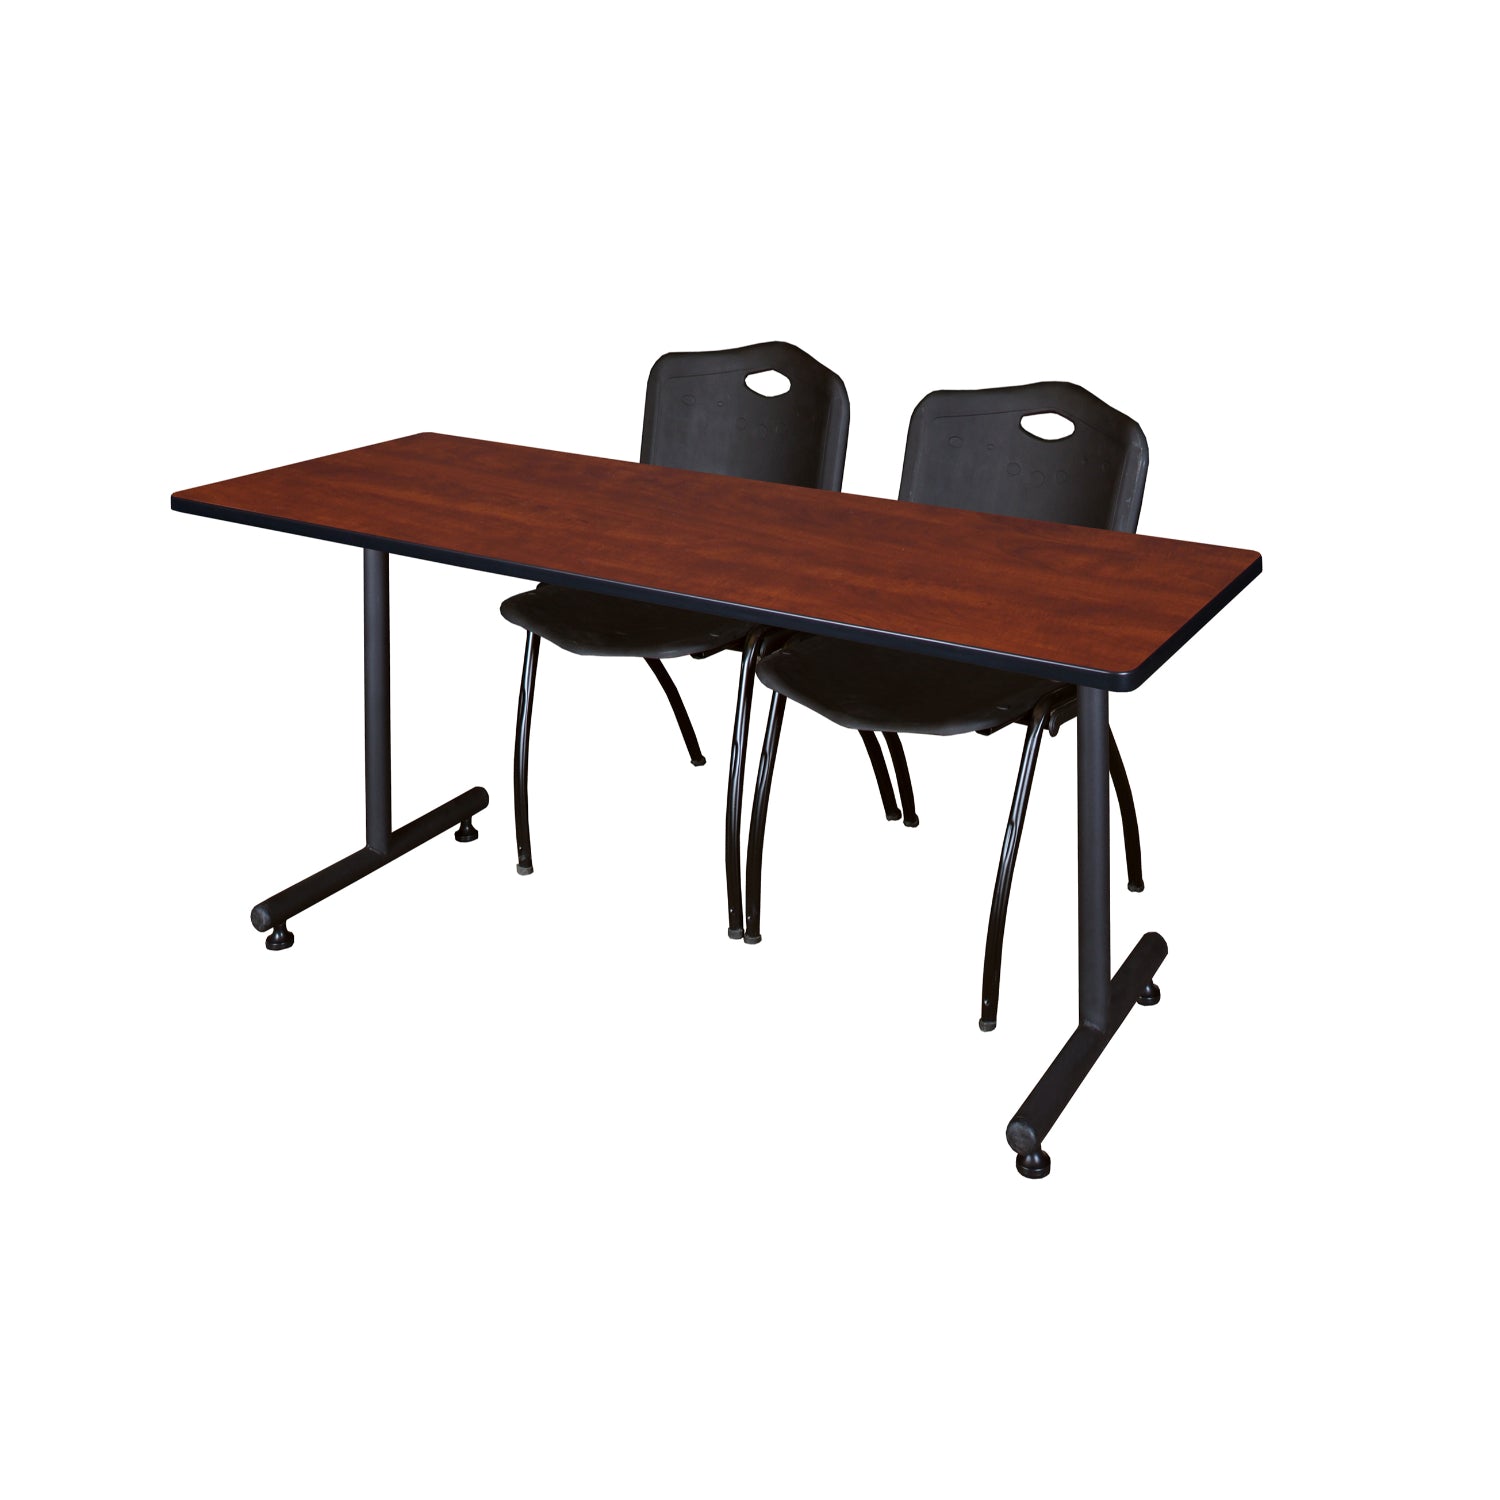 Kobe Training Table and Chair Package, Kobe 66" x 24" T-Base Training/Seminar Table with 2 "M" Stack Chairs